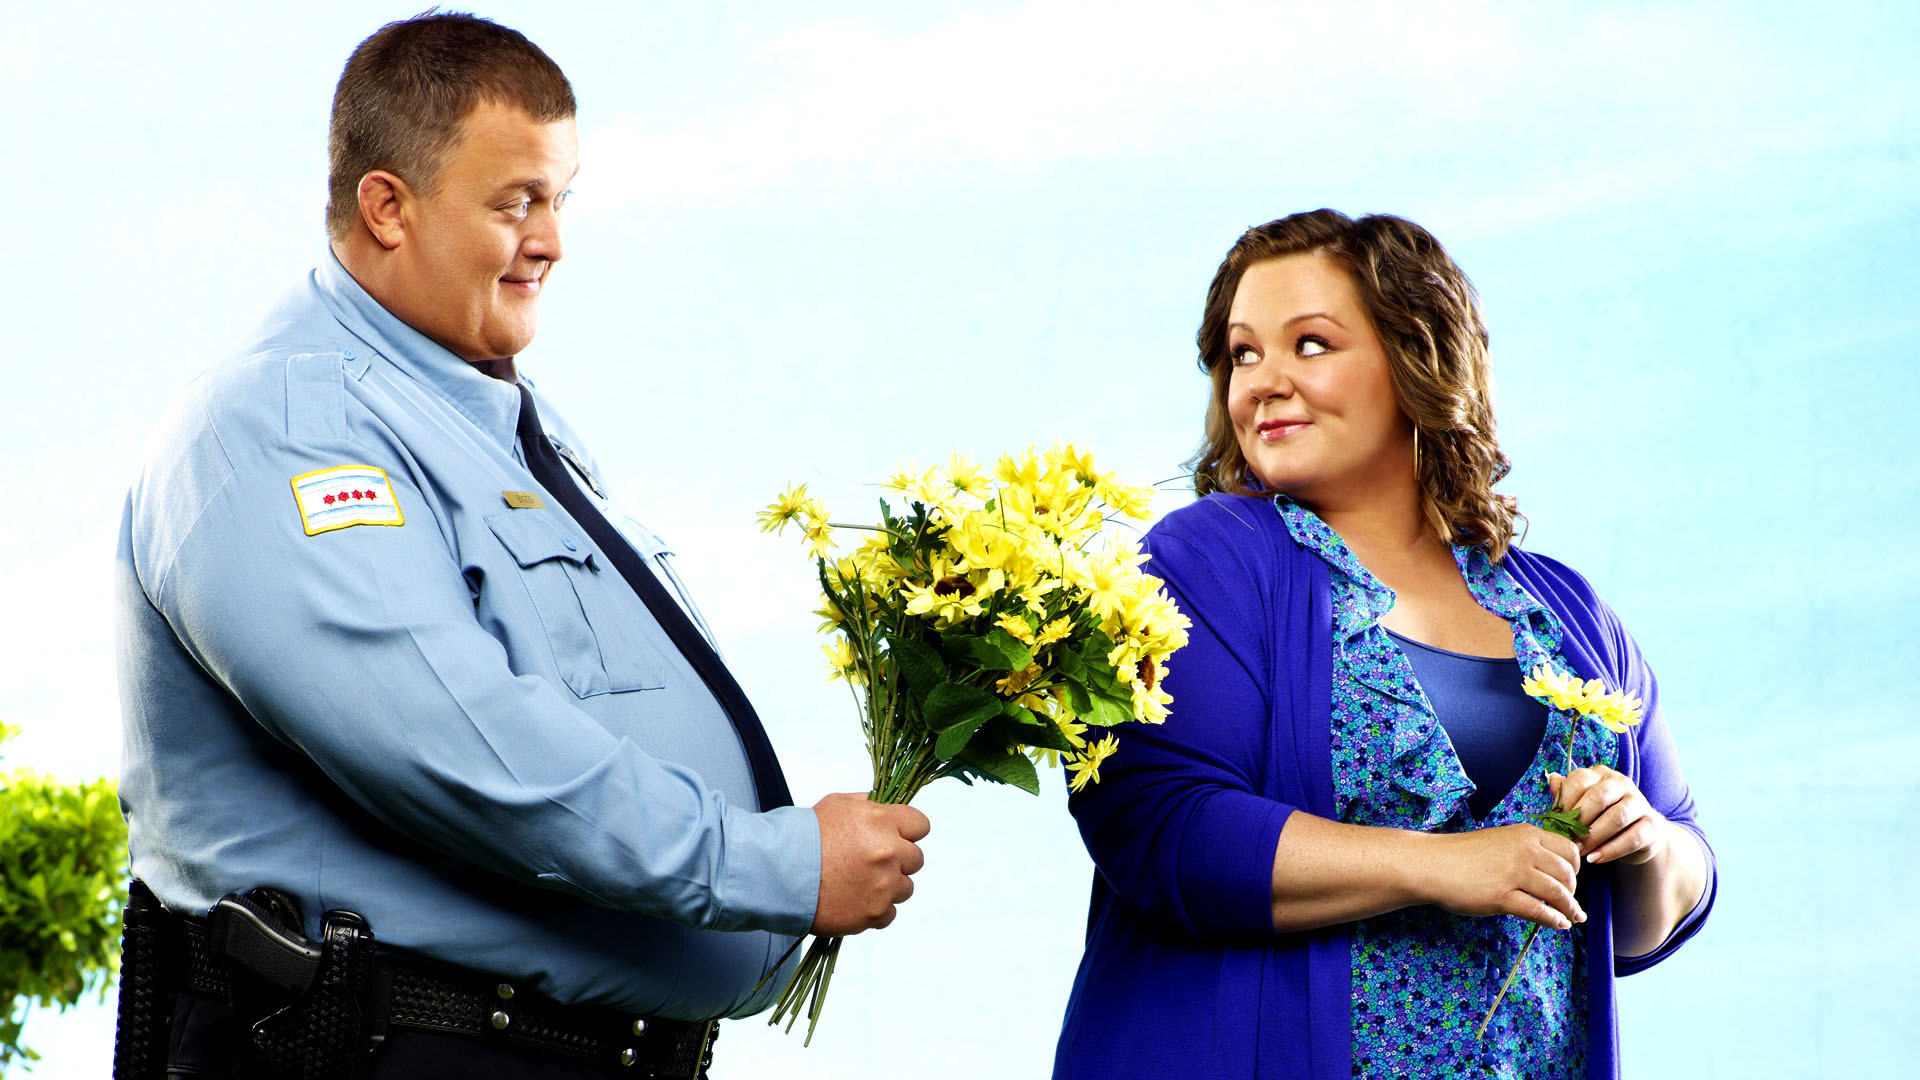 tv show, mike & molly, billy gardell, melissa mccarthy